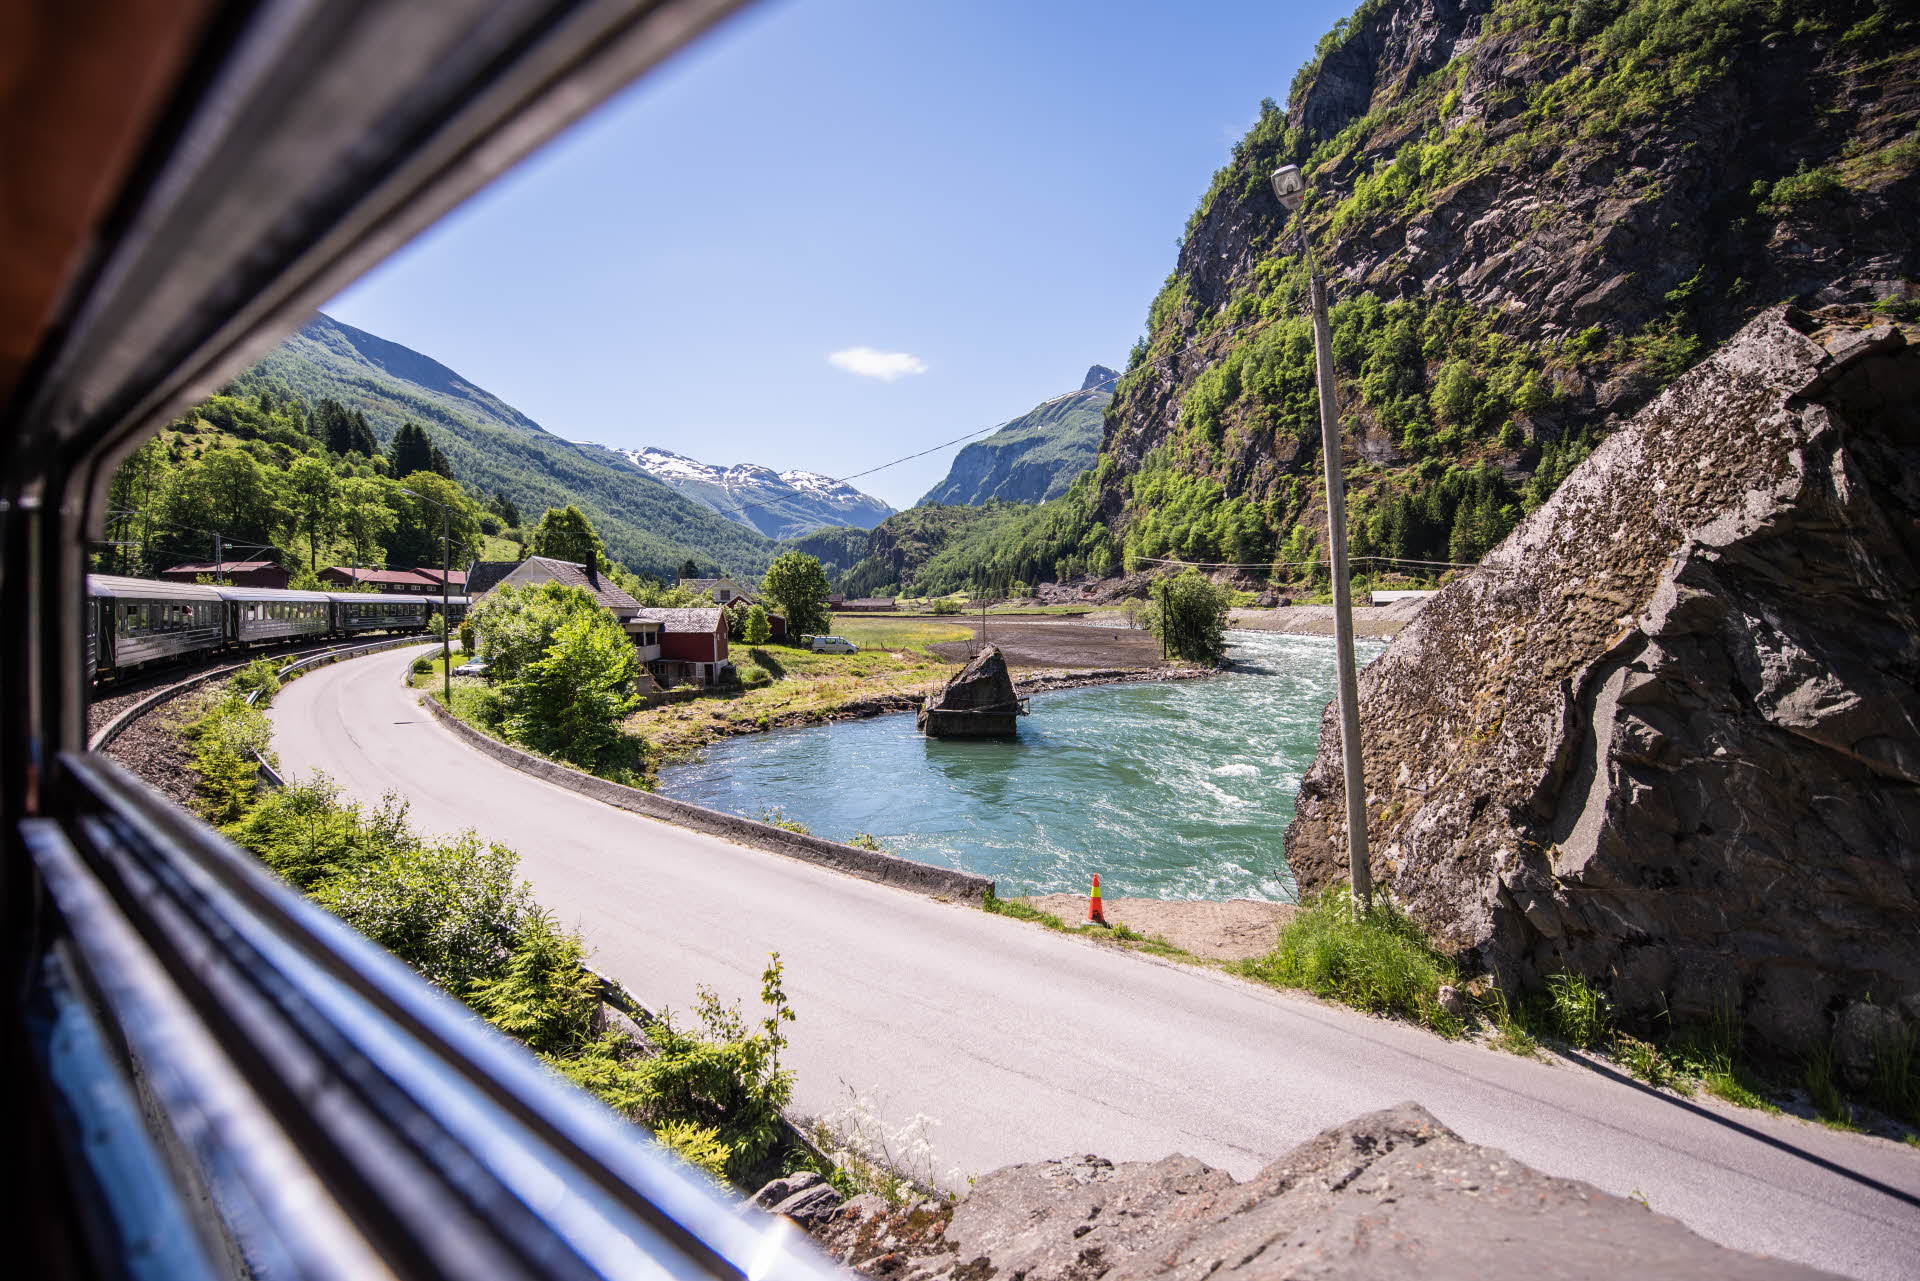 The Flåm Railway travels past a green valley next to the river